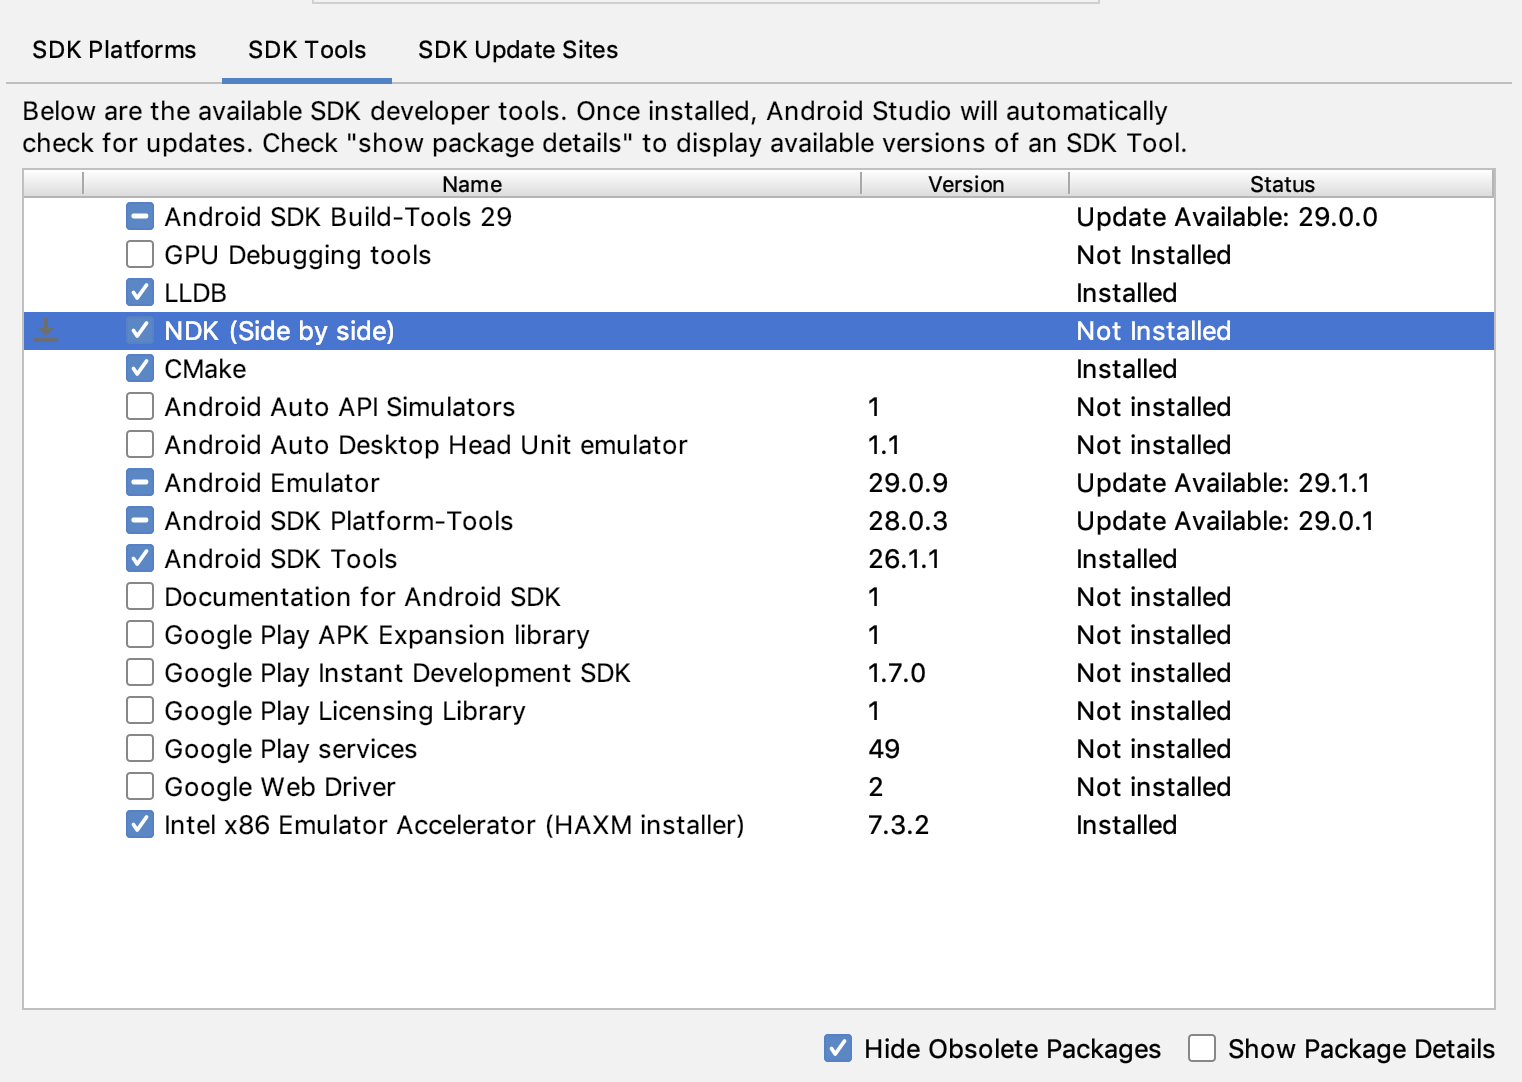 Image of SDK Manager